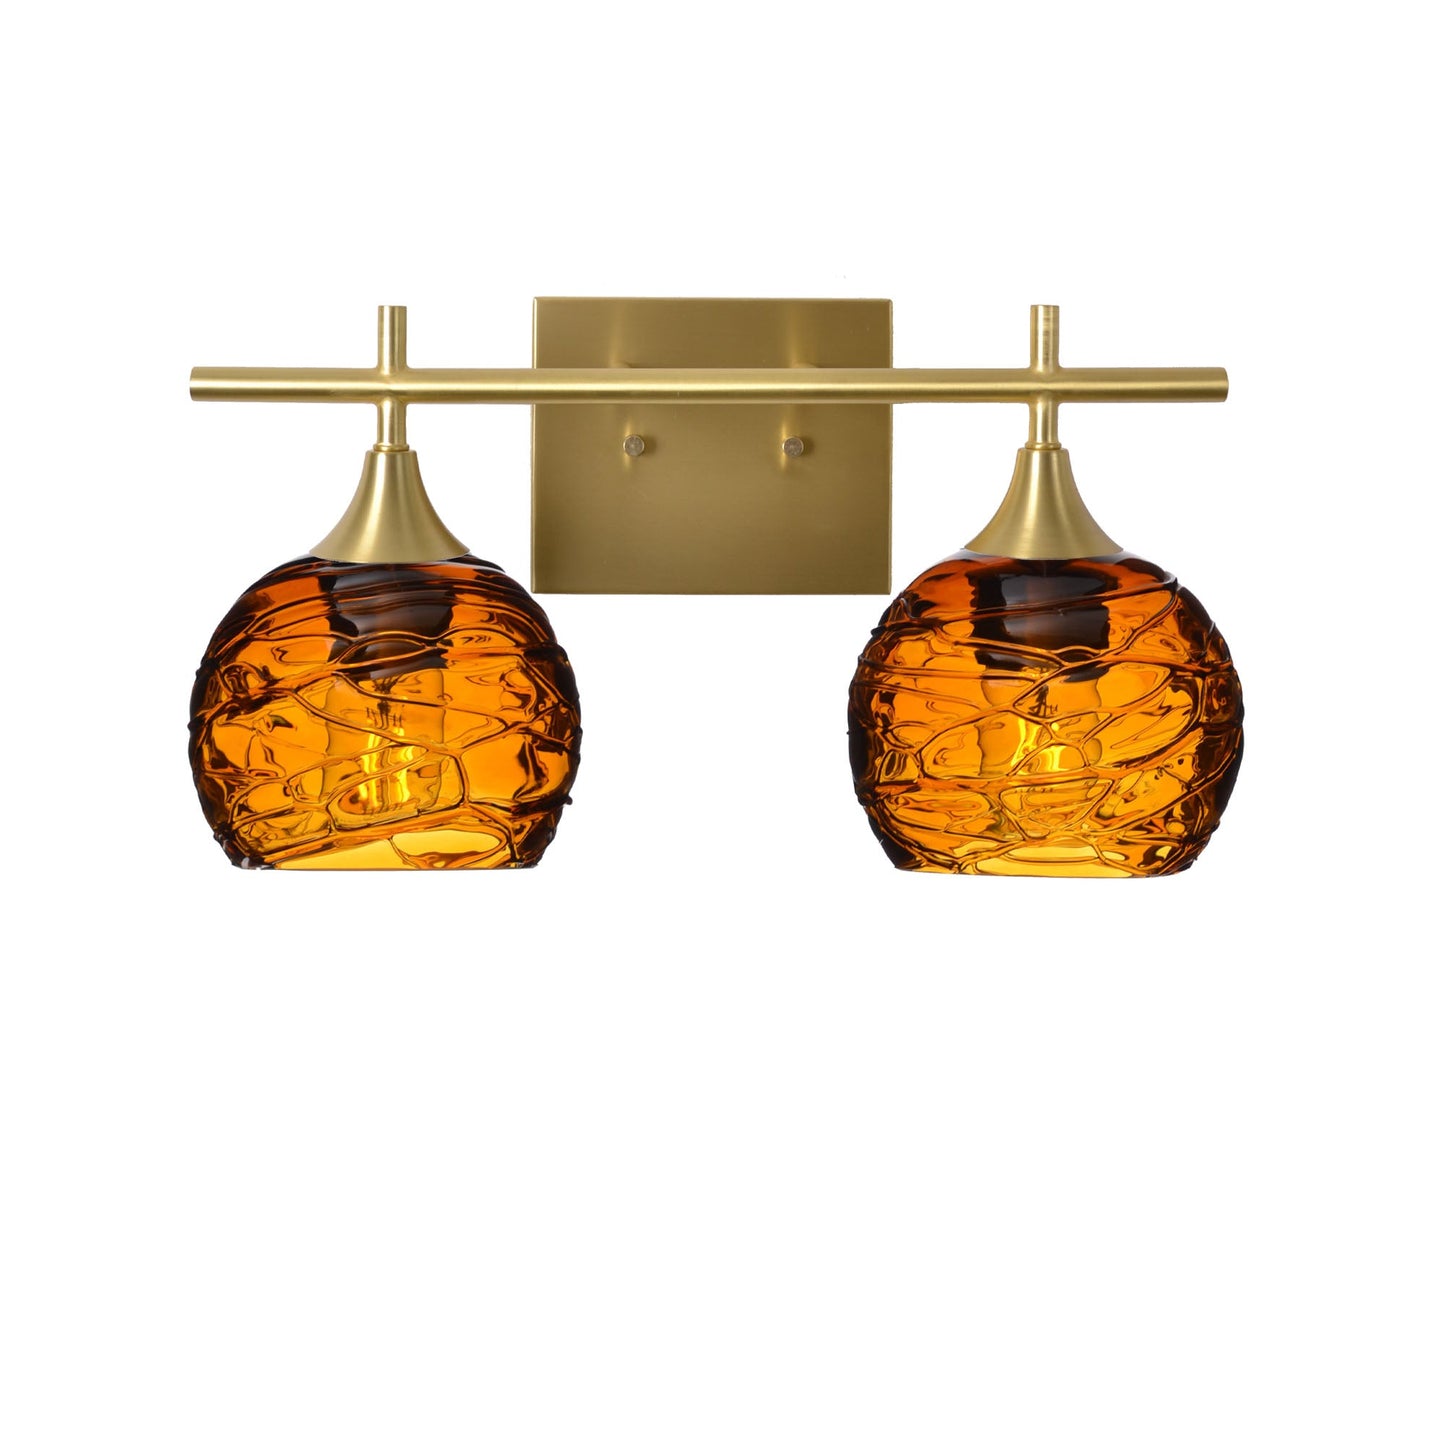 763 Spun: 2 Light Wall Vanity-Glass-Bicycle Glass Co - Hotshop-Golden Amber-Satin Brass-Bicycle Glass Co